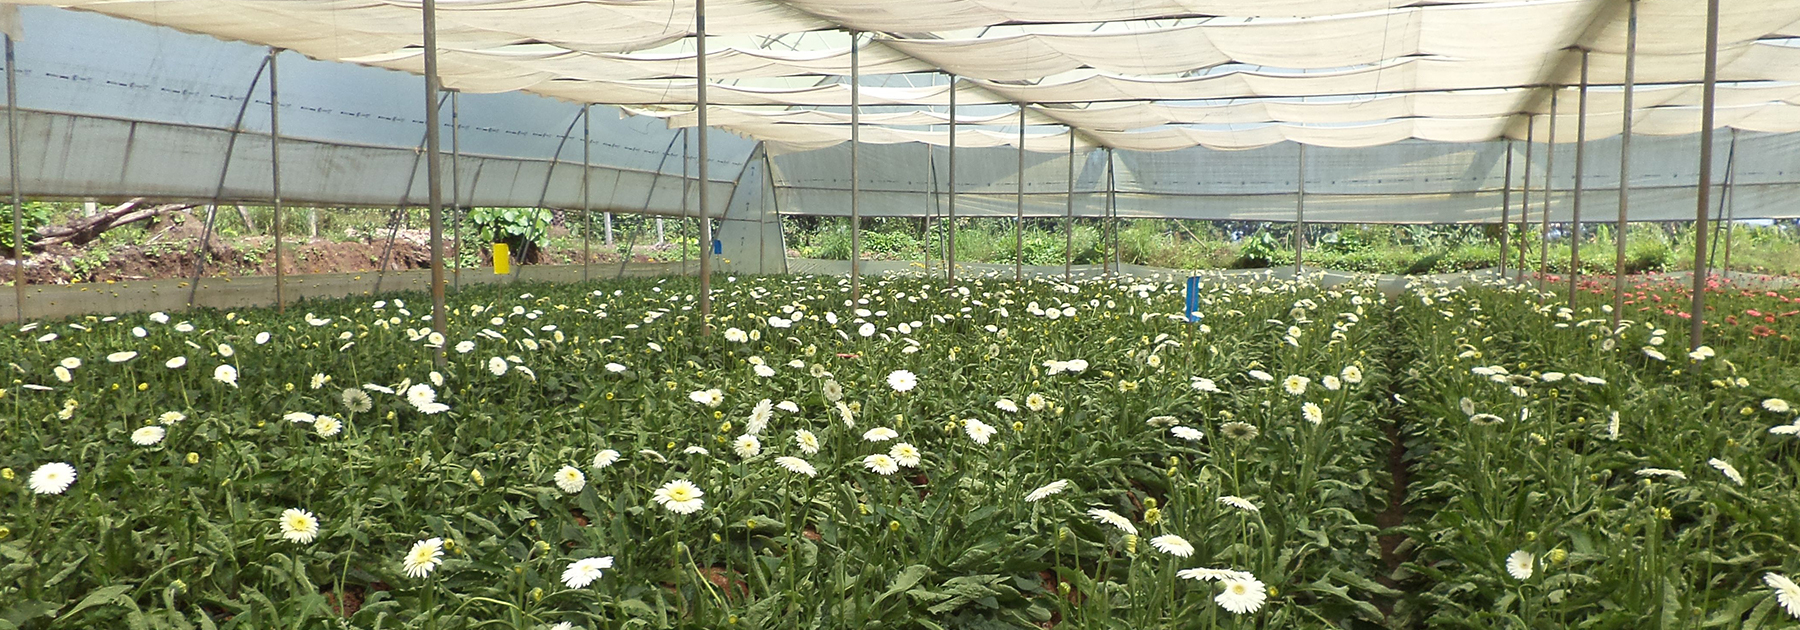 Gerbera Cultivation-in Poly-house, Dr. Rajendra Prasad Central Agriculture University. (Neerajk.bit, licensed under CC BY-SA 4.0)